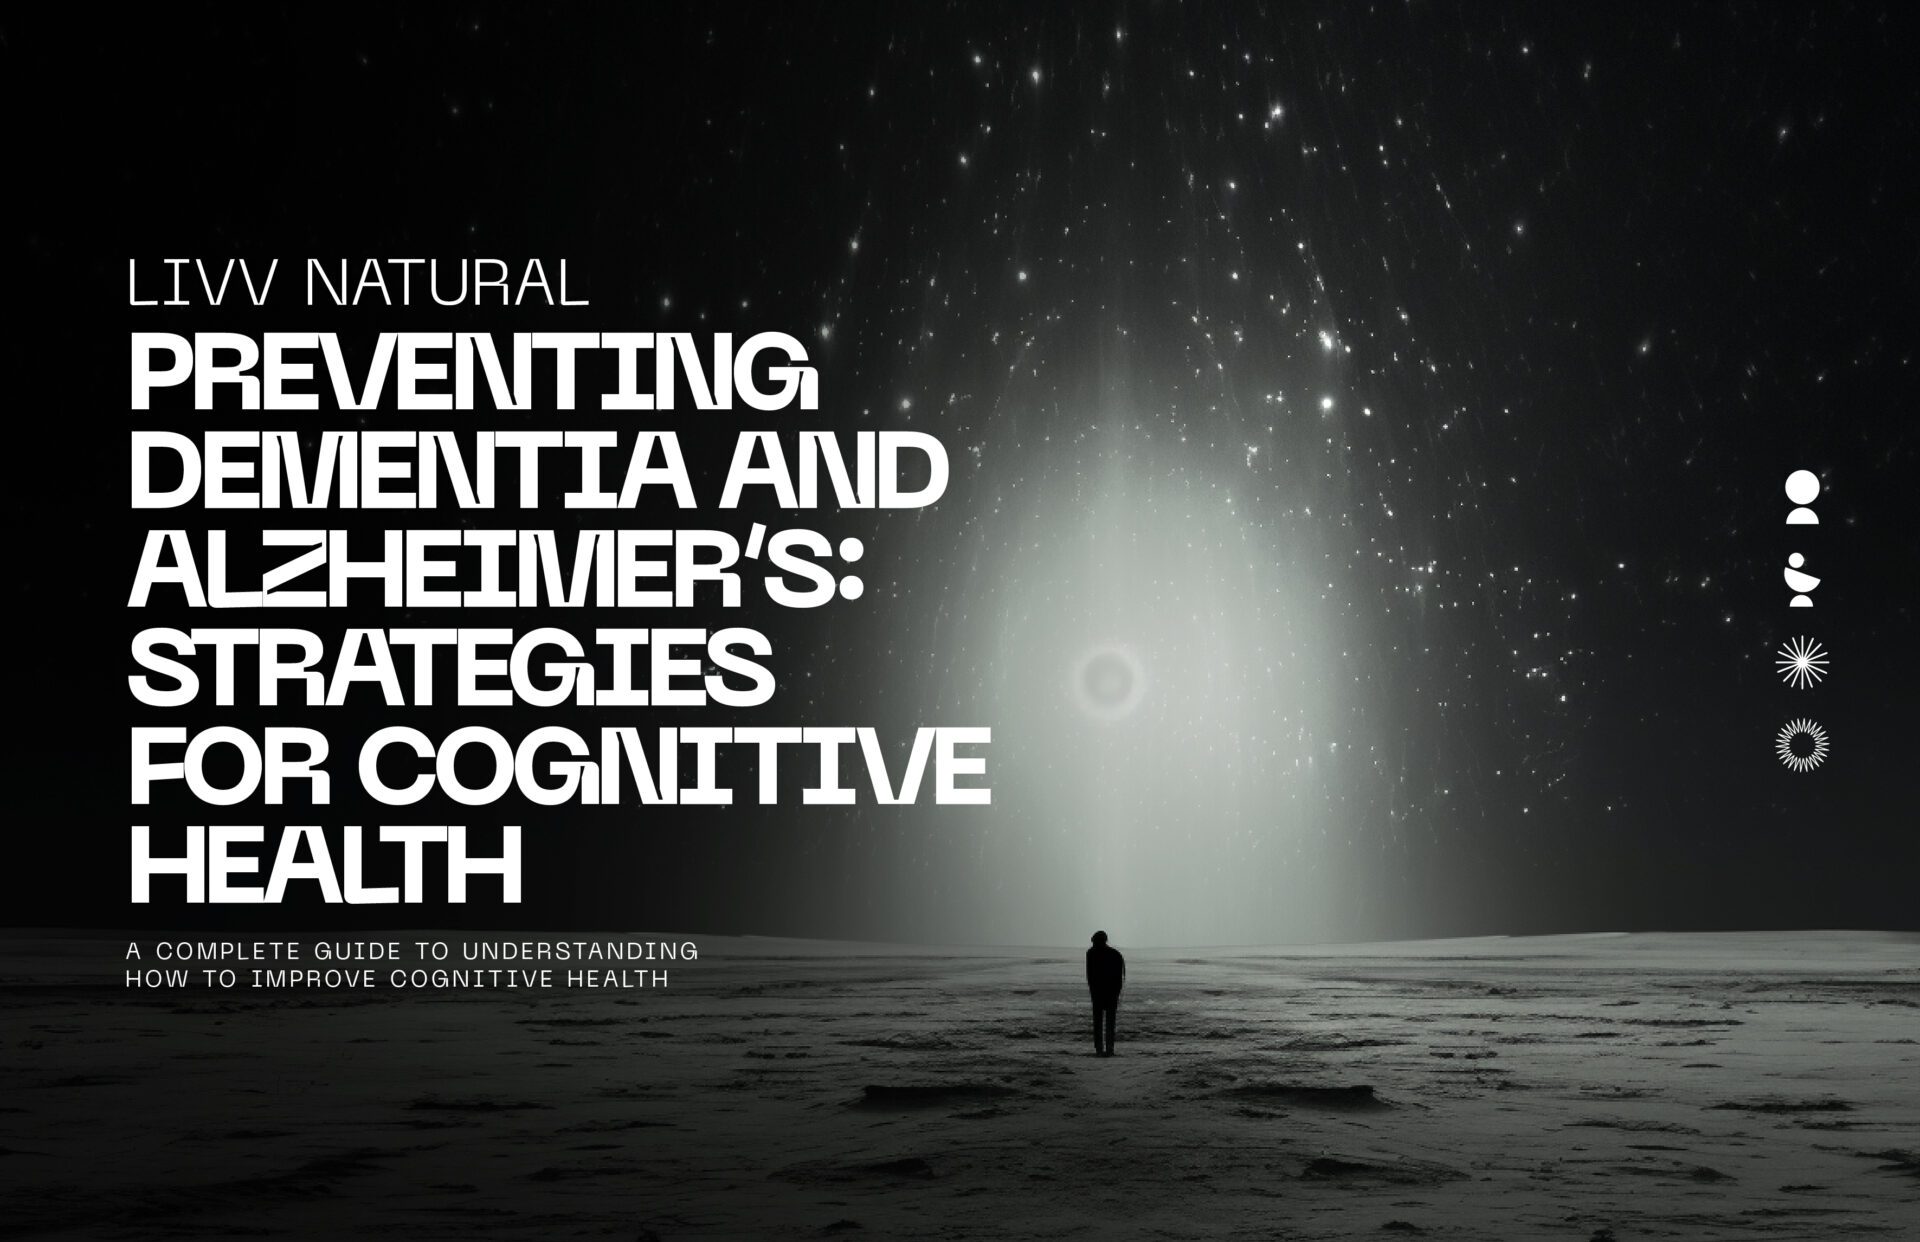 Preventing dementia and alzheimers's: Strategies for cognitive health